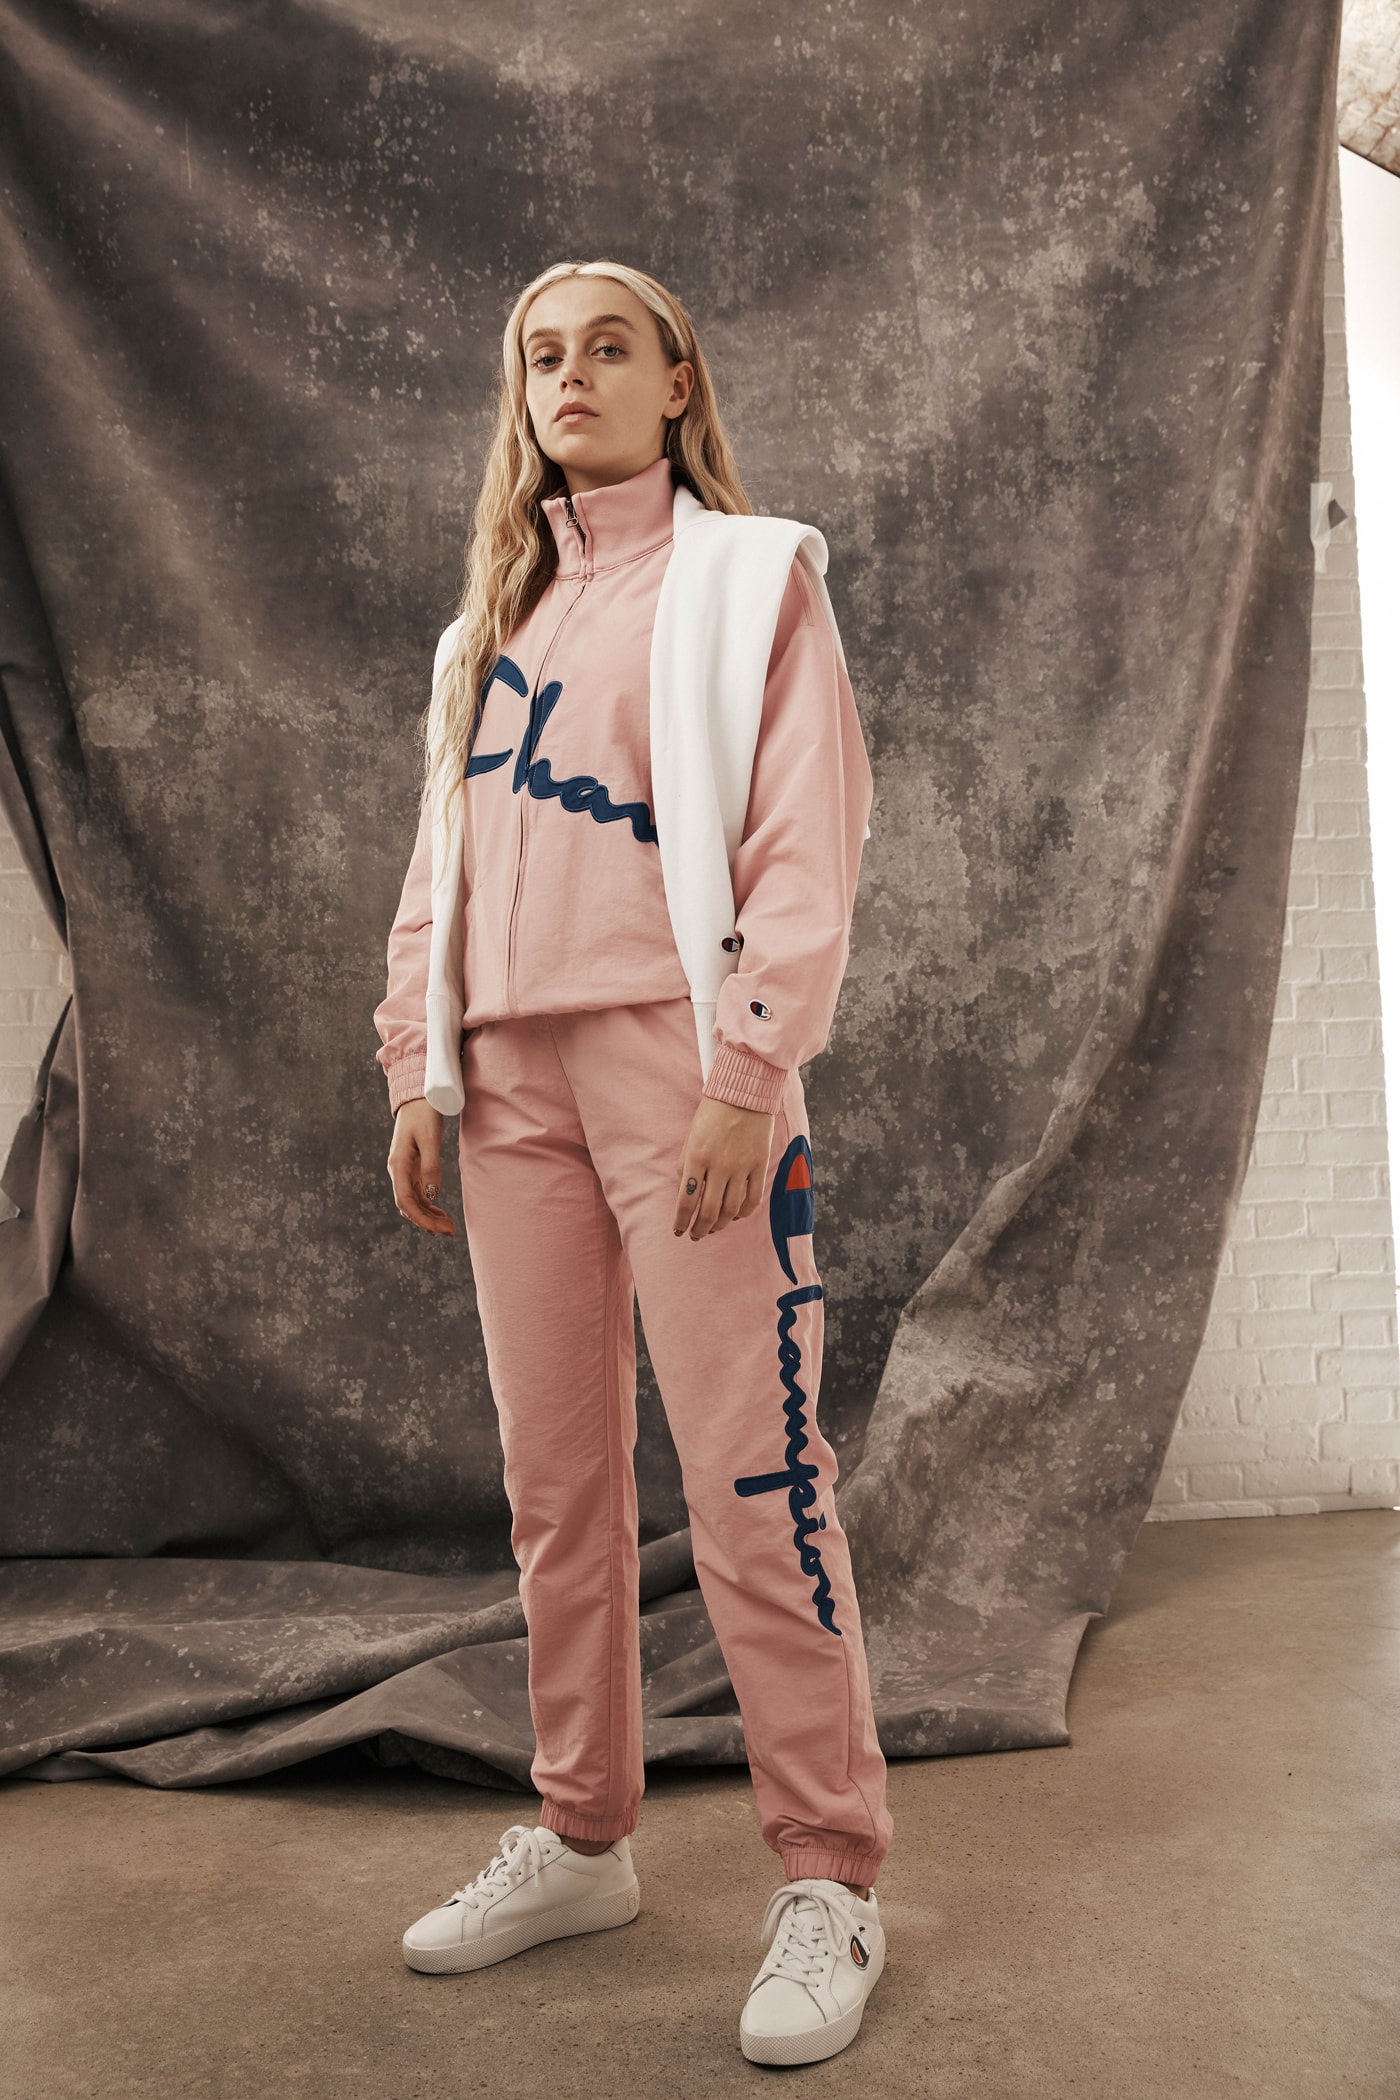 Champion Reverse Weave Fall Winter 2019 Collection Sweatsuit Pink